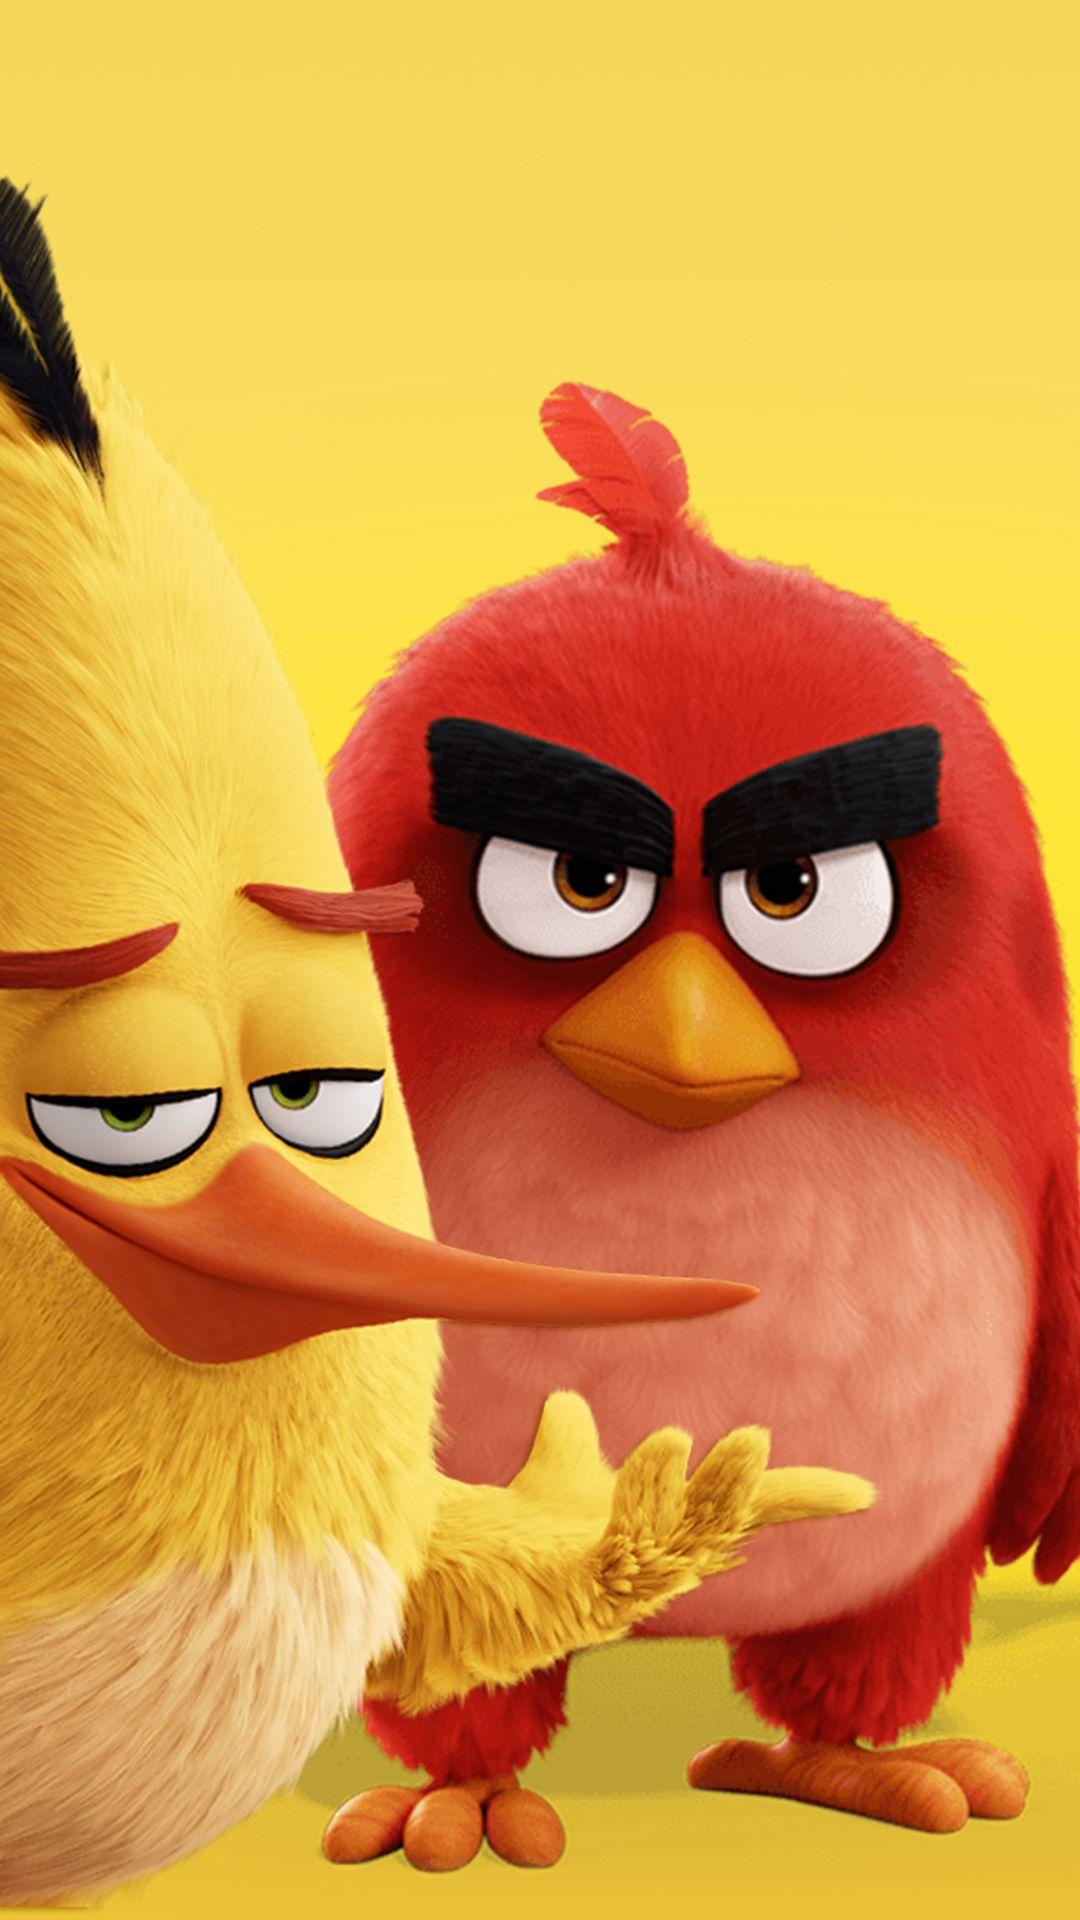 Free download Angry Birds Wallpaper Download For Cellphone